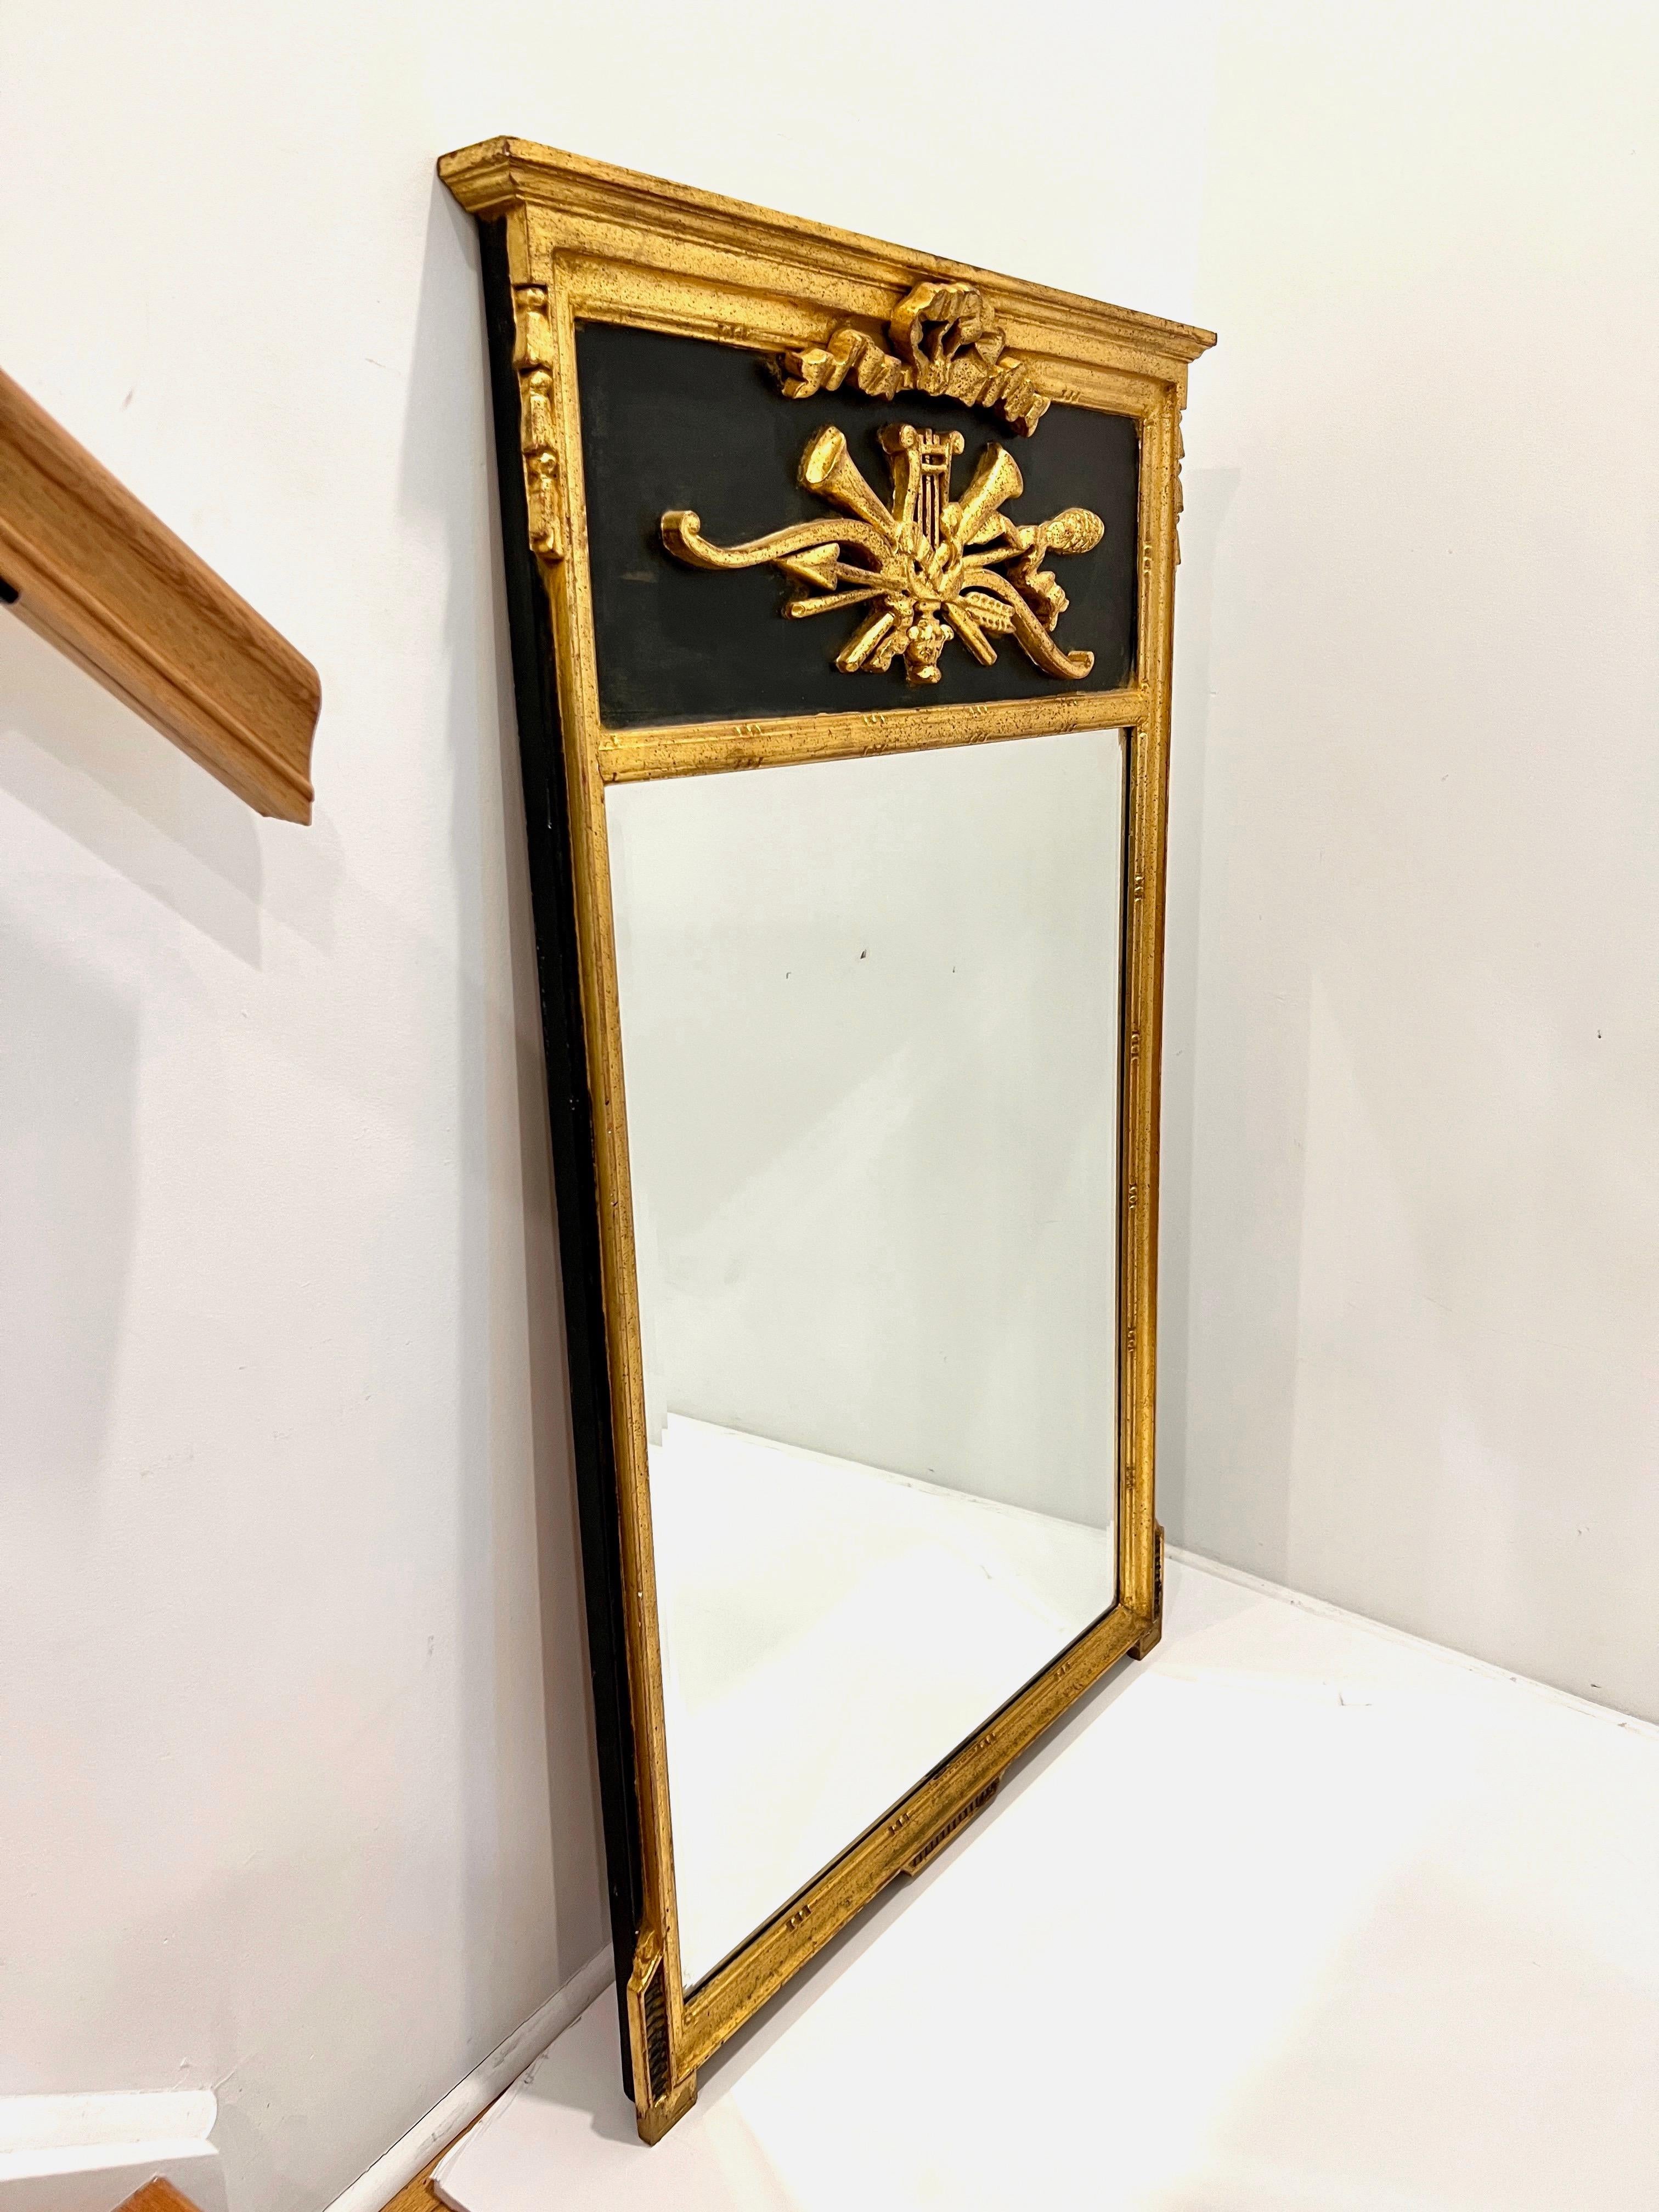 Louis XVI Neoclassical Trumeau Mirror with Giltwood and Black Frame 1